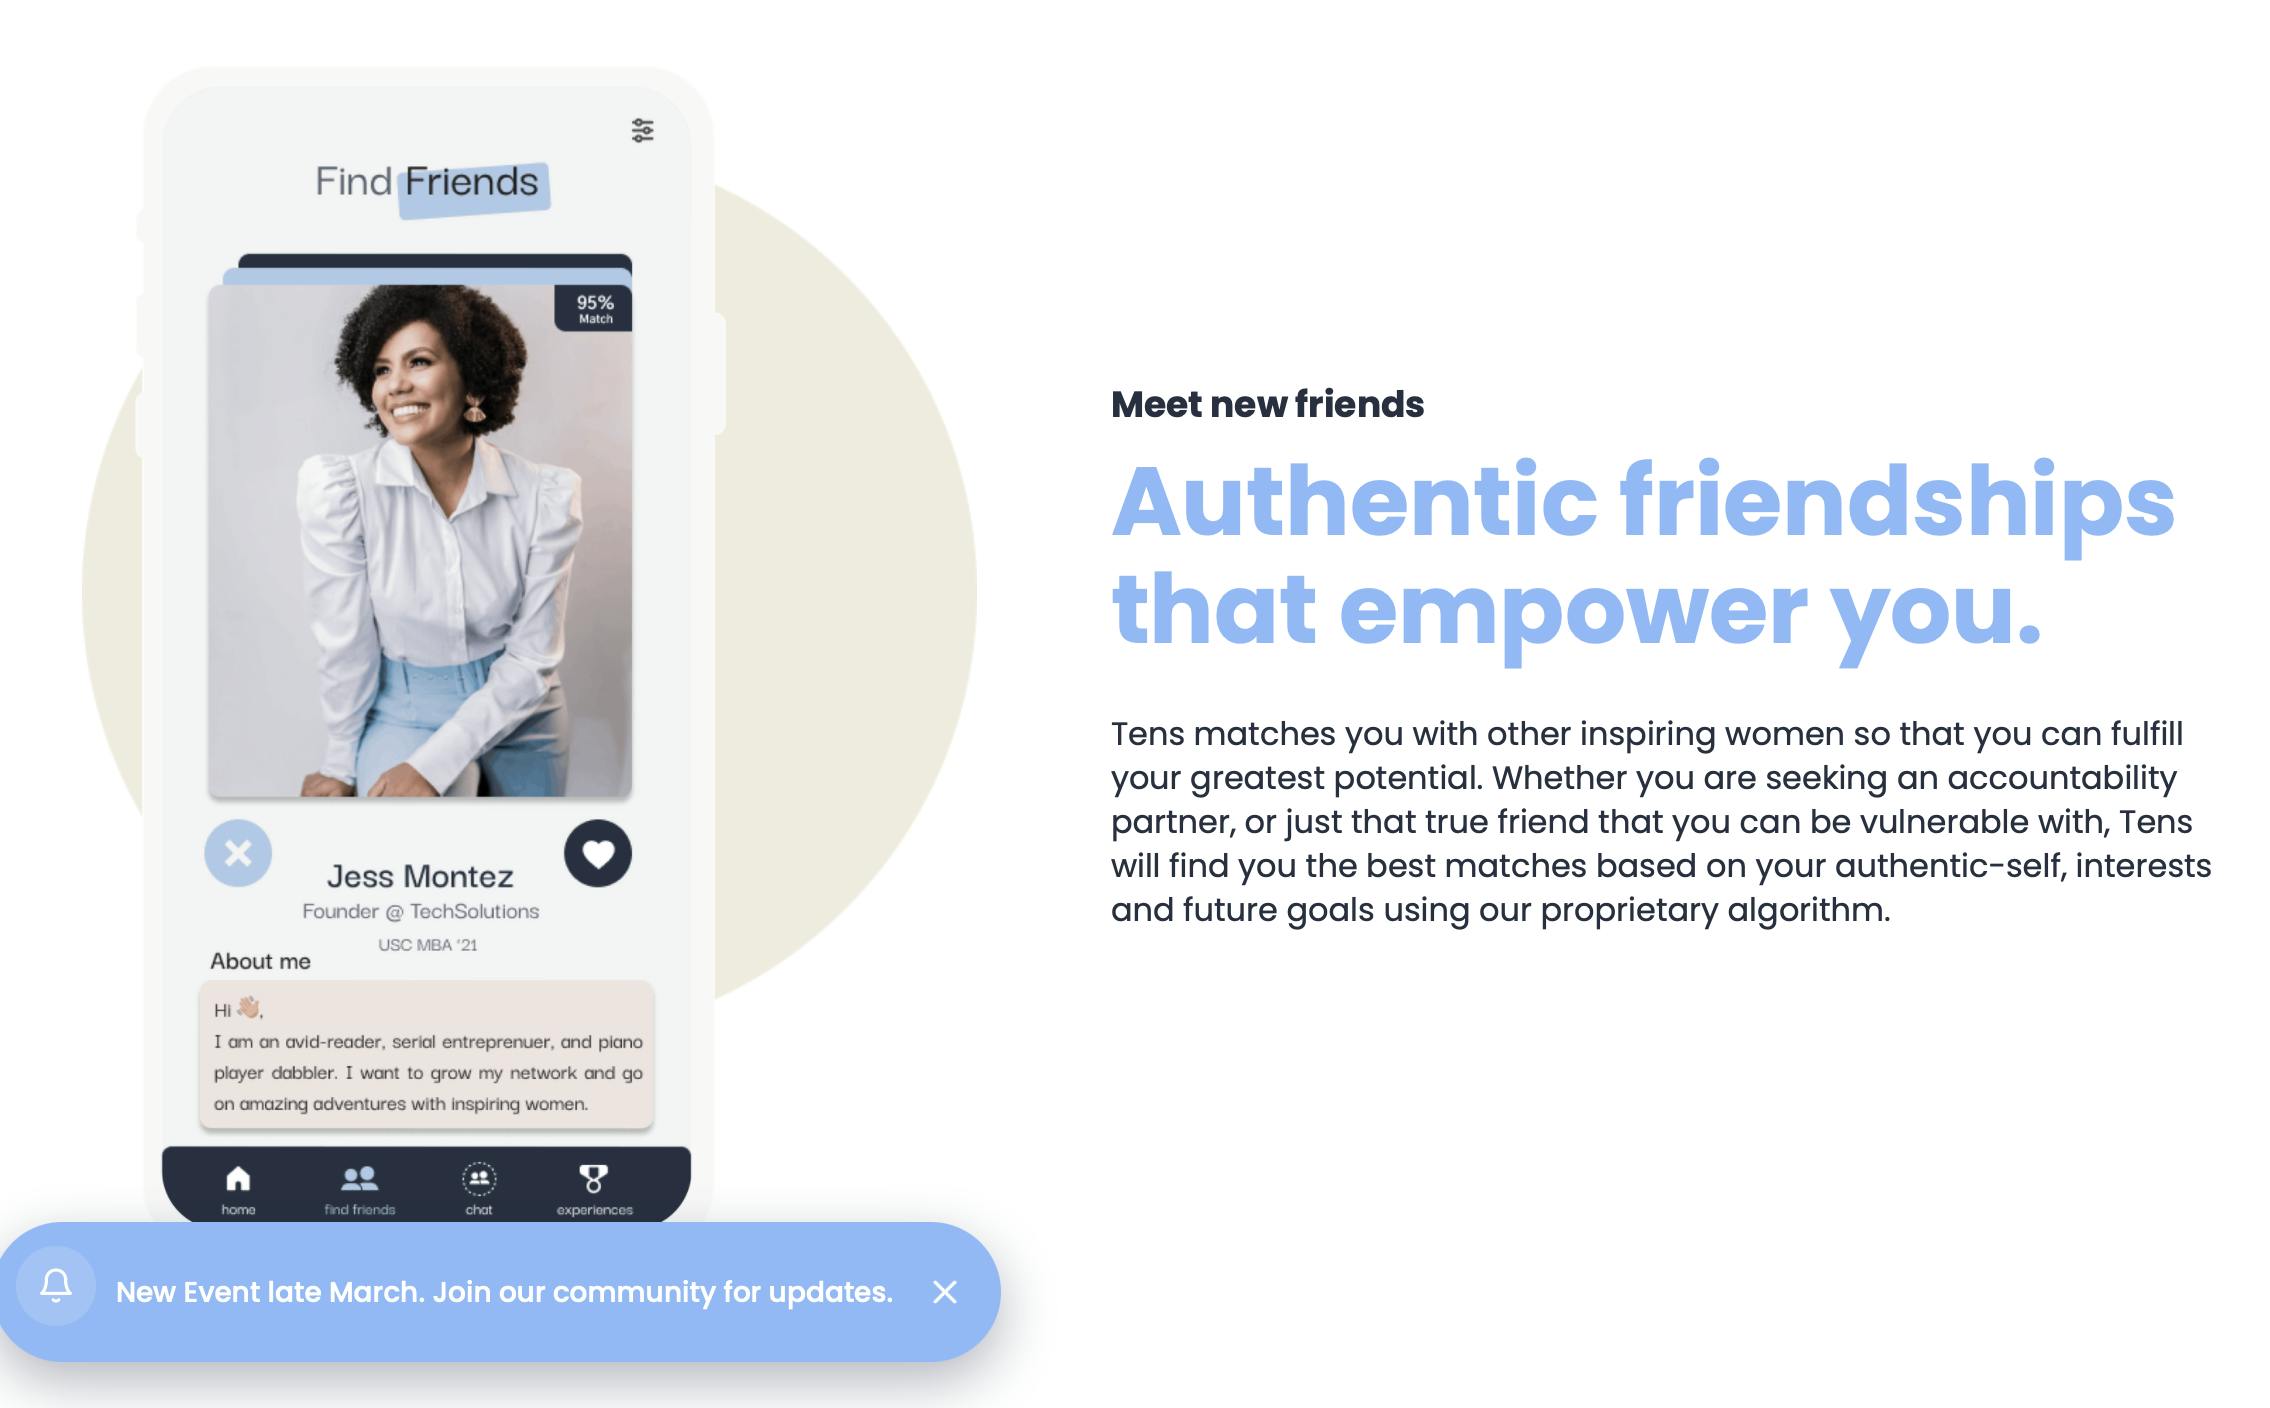 Promo flyer for an app promising "Authentic friendships that empower you: Tens matches you with other inspiring women so that you can fulfill your greatest potential. Whether you are seeking an accountability partner, or just that true friend that you can be vulnerable with, Tens will find you the best matches based on your authentic-self, interests and future goals using our proprietary algorithm." Next to the text is a mockup of a smartphone app showing a card of a woman and her personal information.